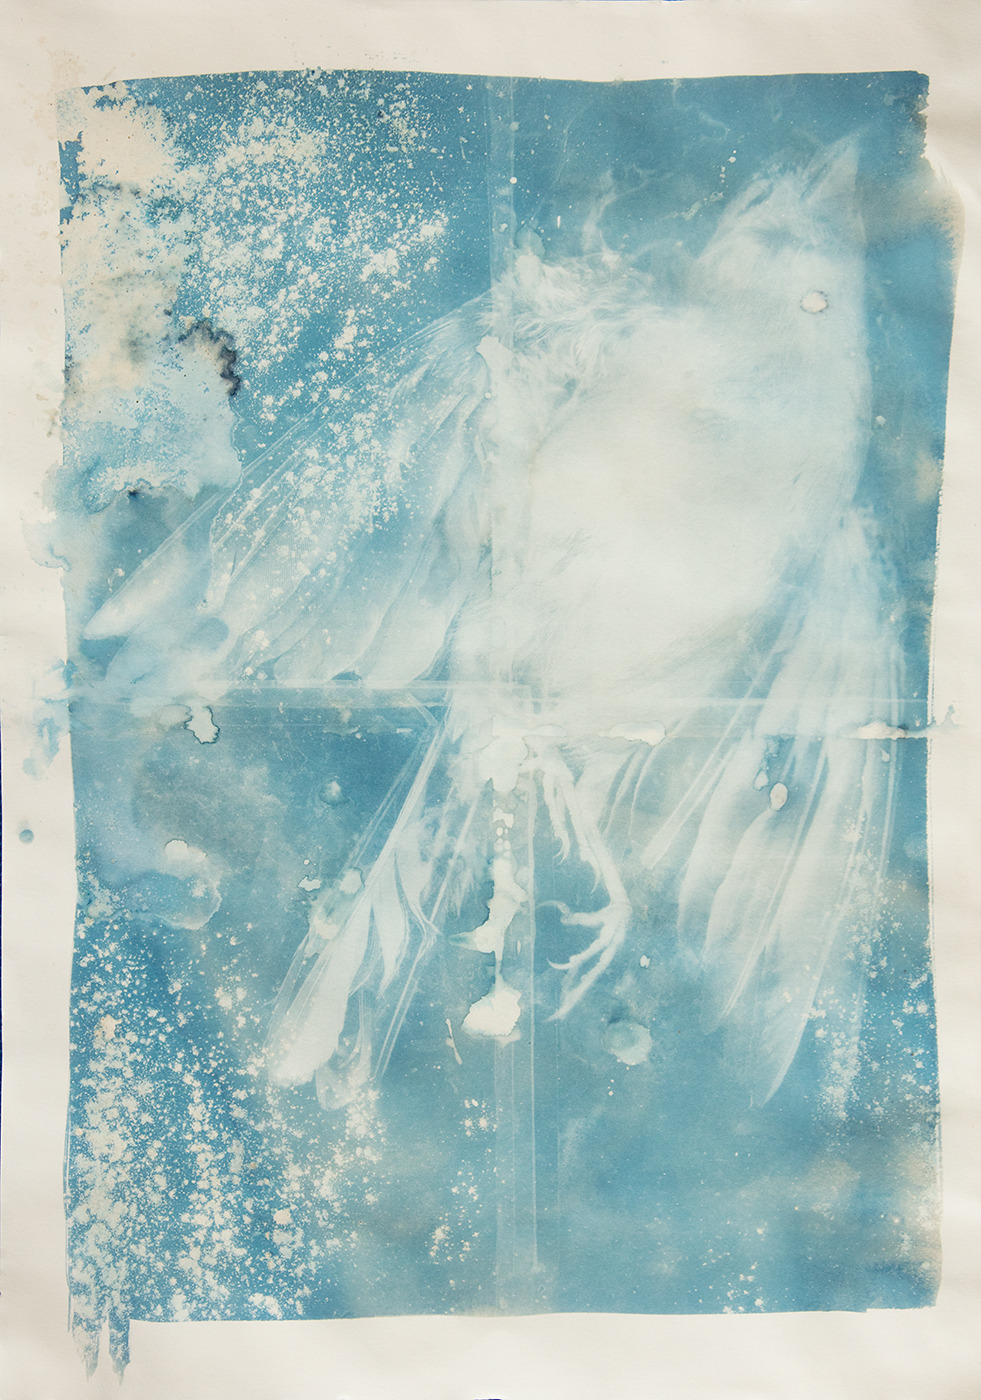 Wet-Cyanotype
Buchfink
“presents from our cats”
Triptychon
A2
2020